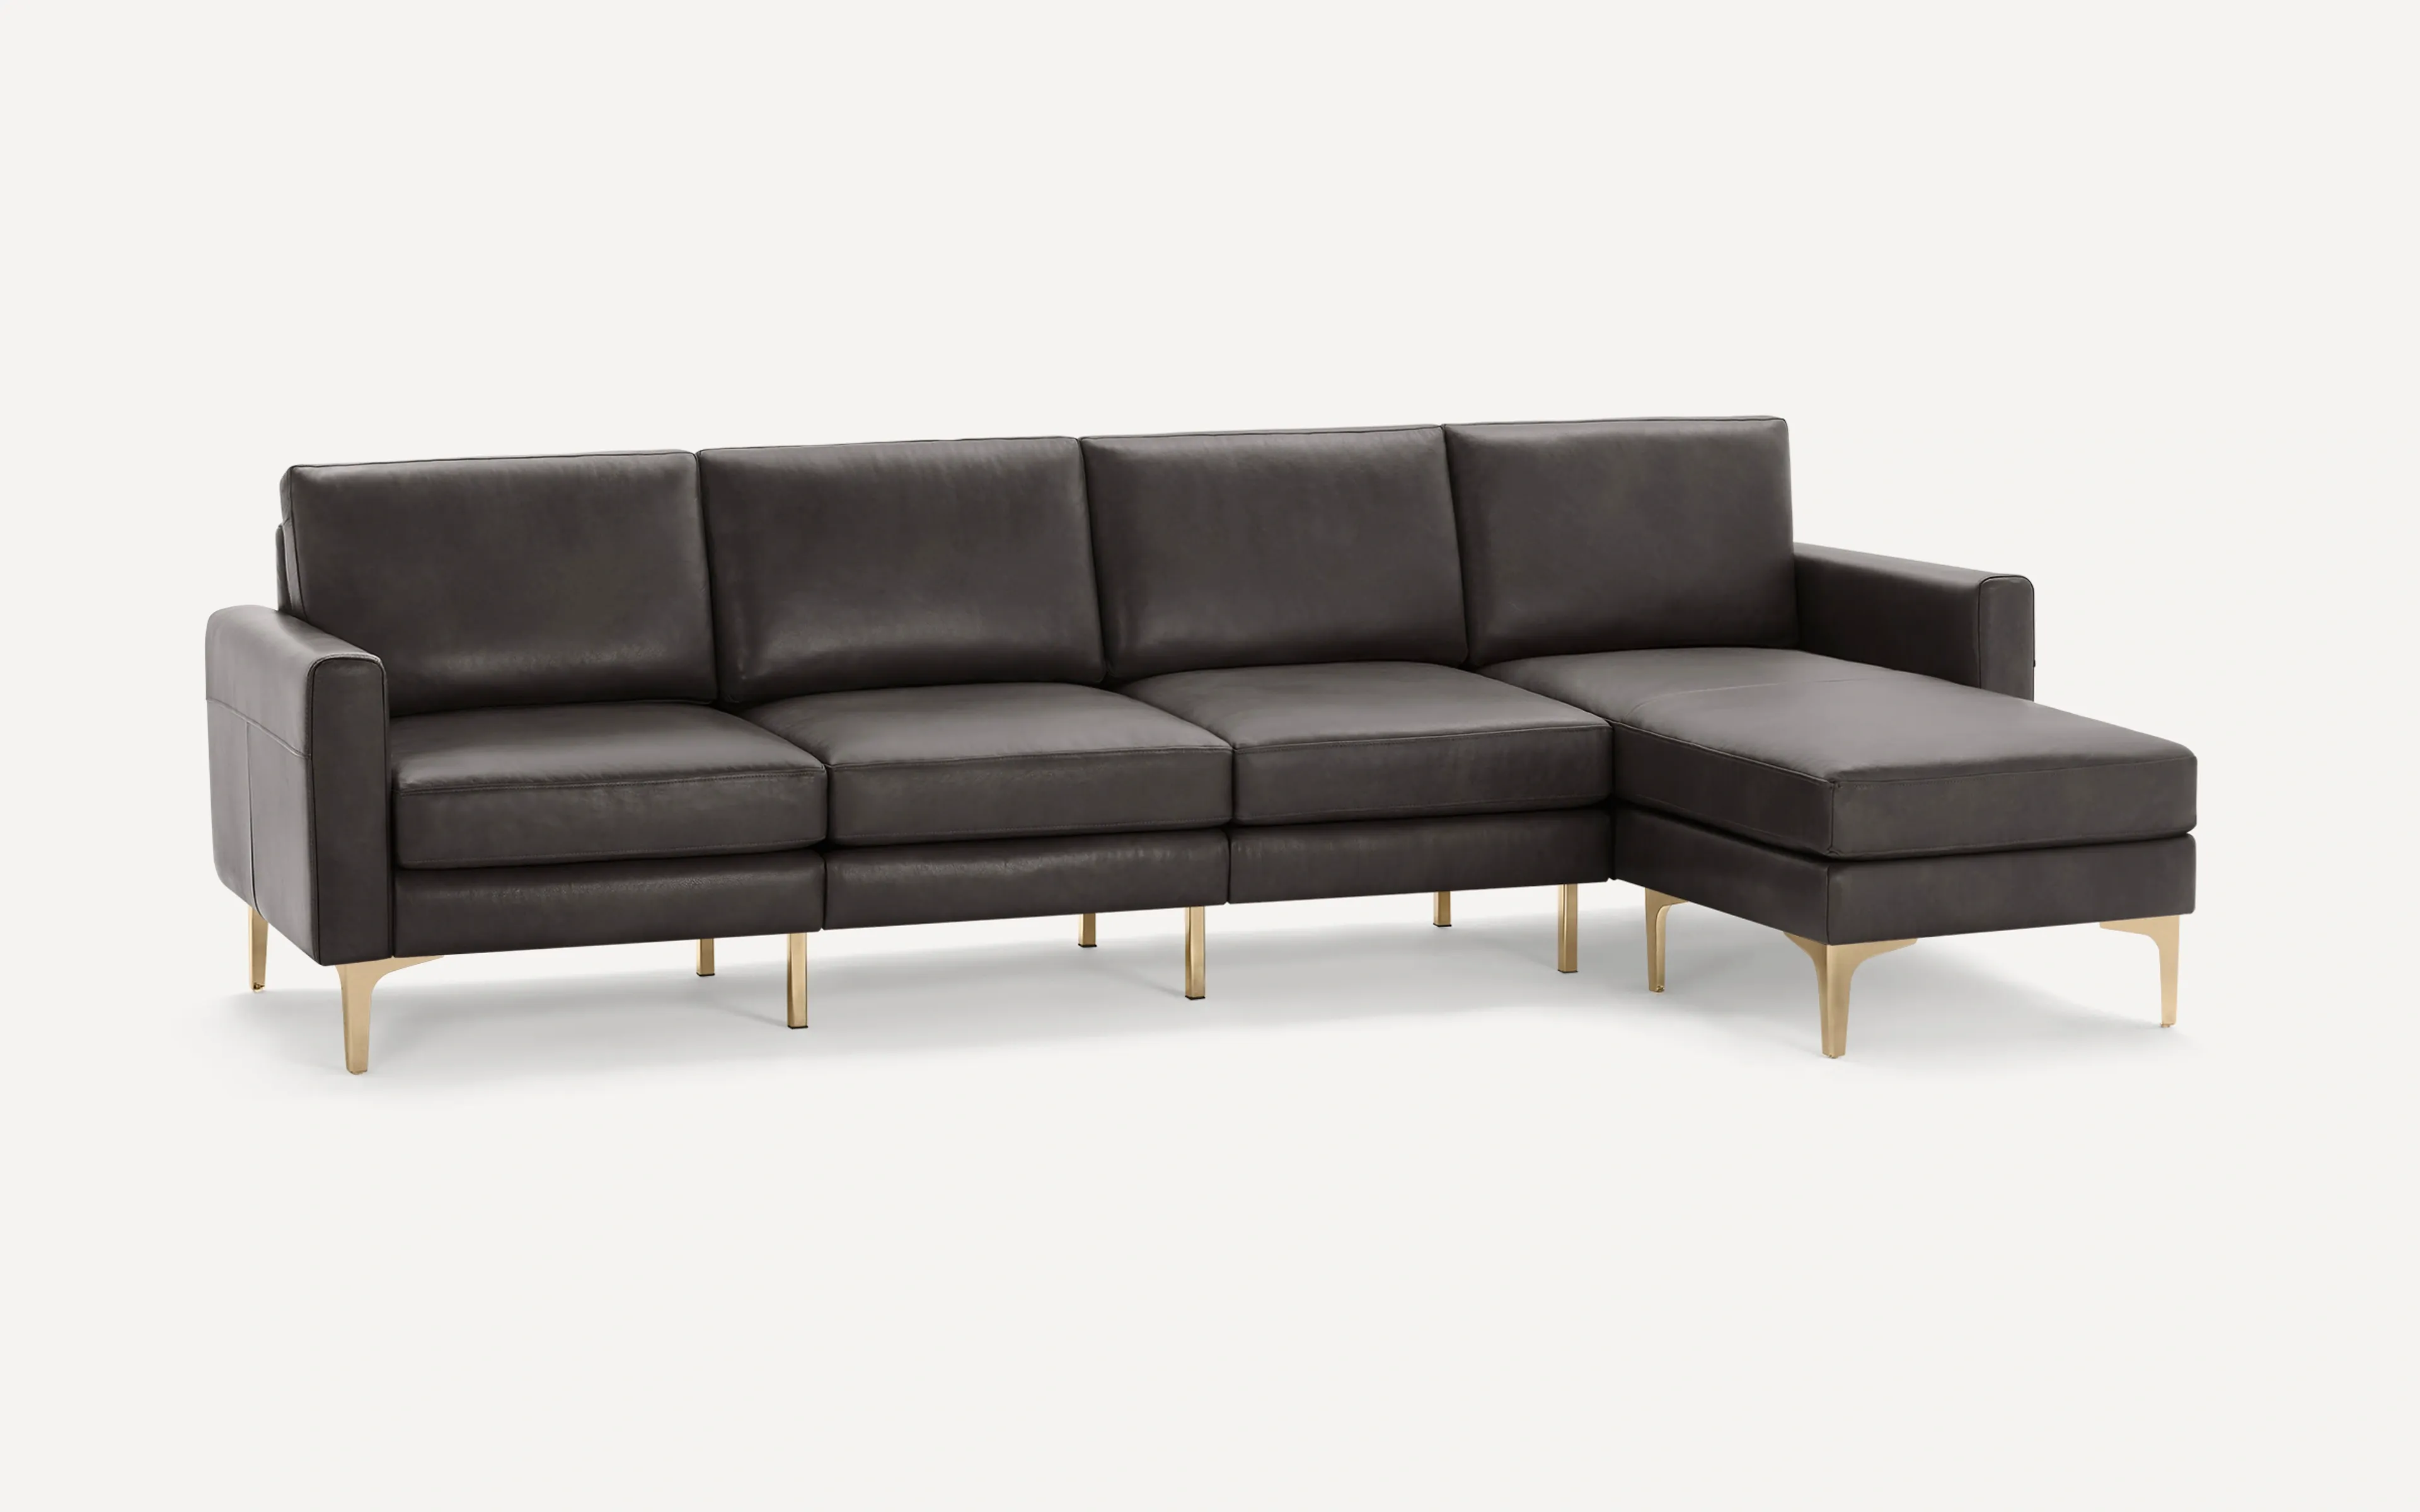 Original Nomad Chaise King Sofa in Slate Leather